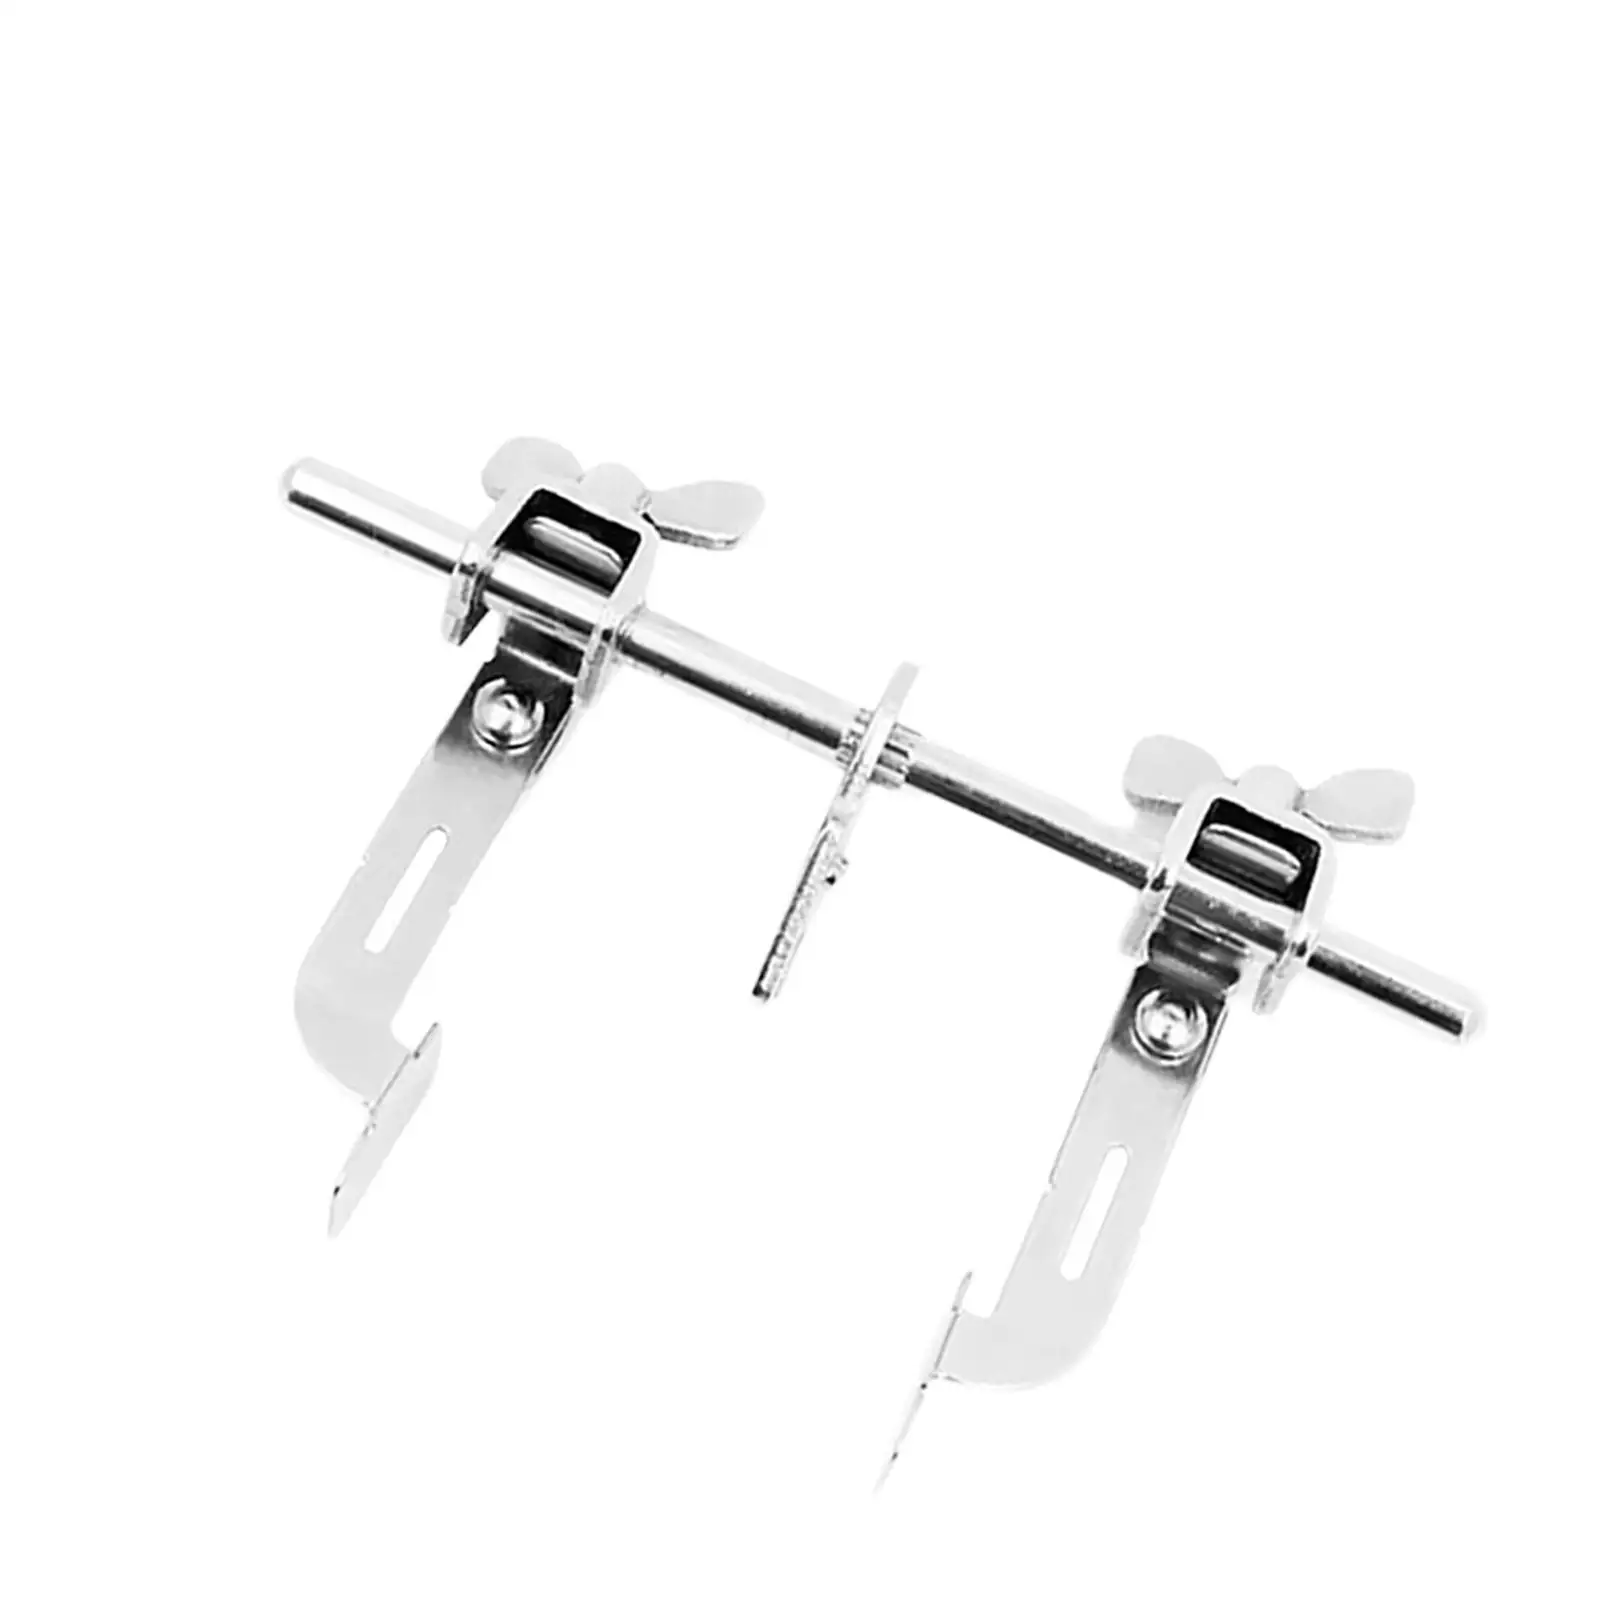 Professional Sewing Machine Presser Foot Steel Linear Positioner Sewing Machine Double Guide Stitch Ruler for Parts Replacement